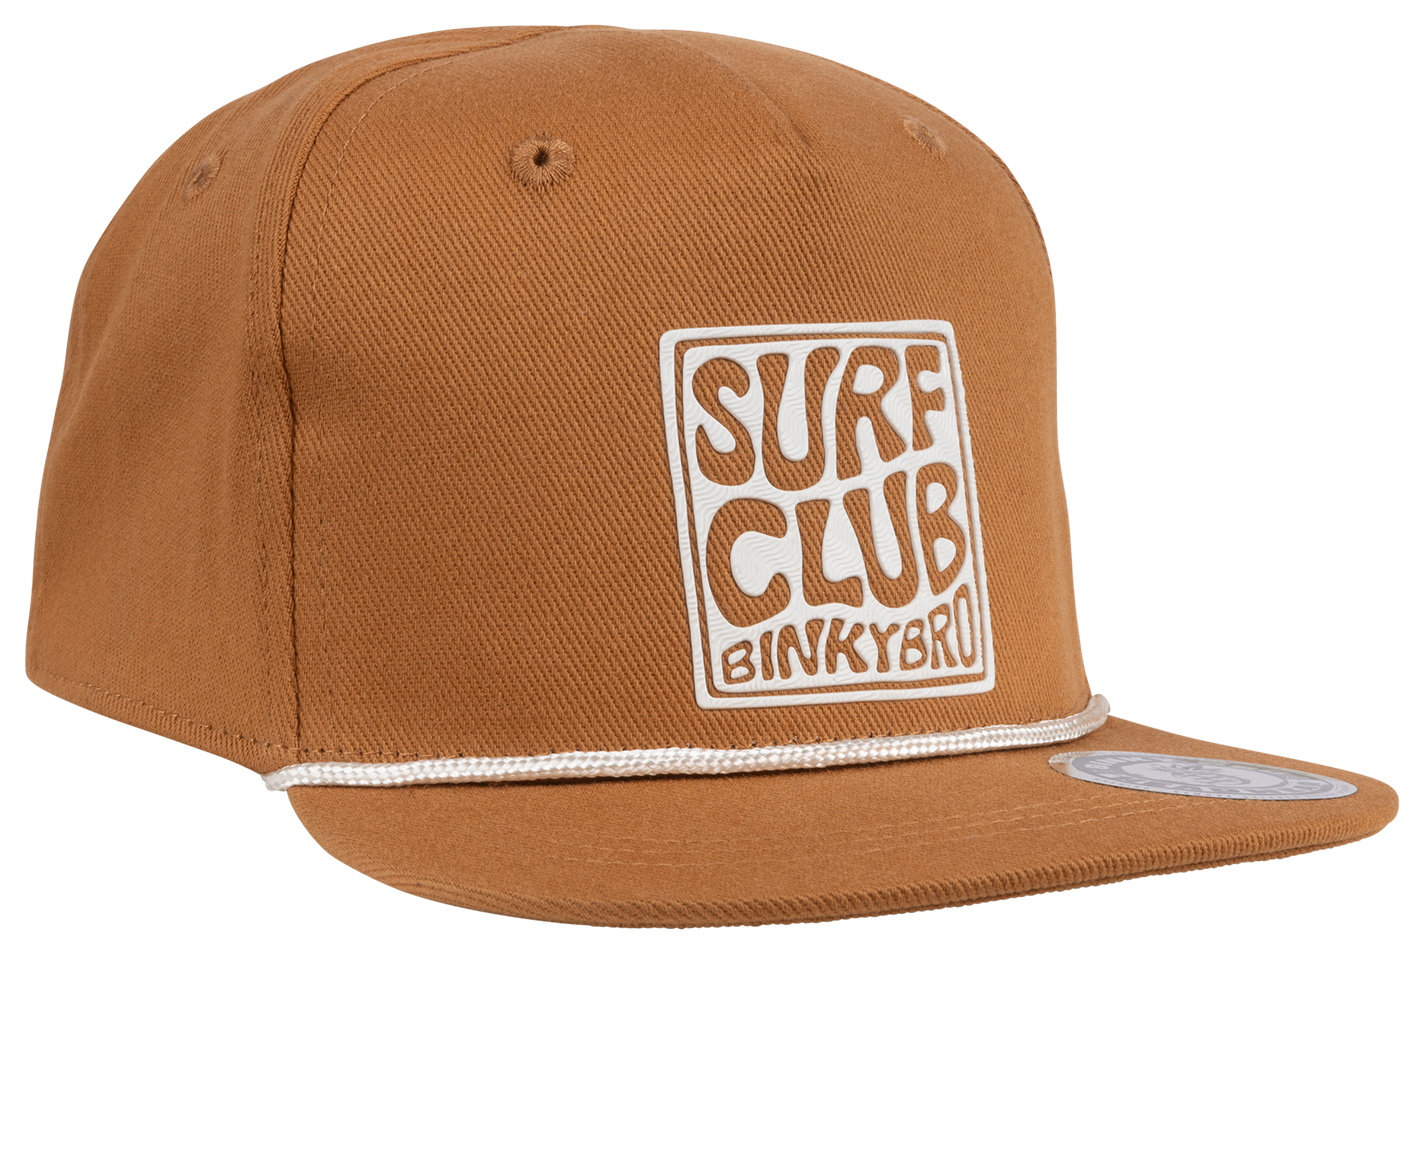 Surf Club Hat: Toddler (12 months - 3 years) / Brown / Standard Fit